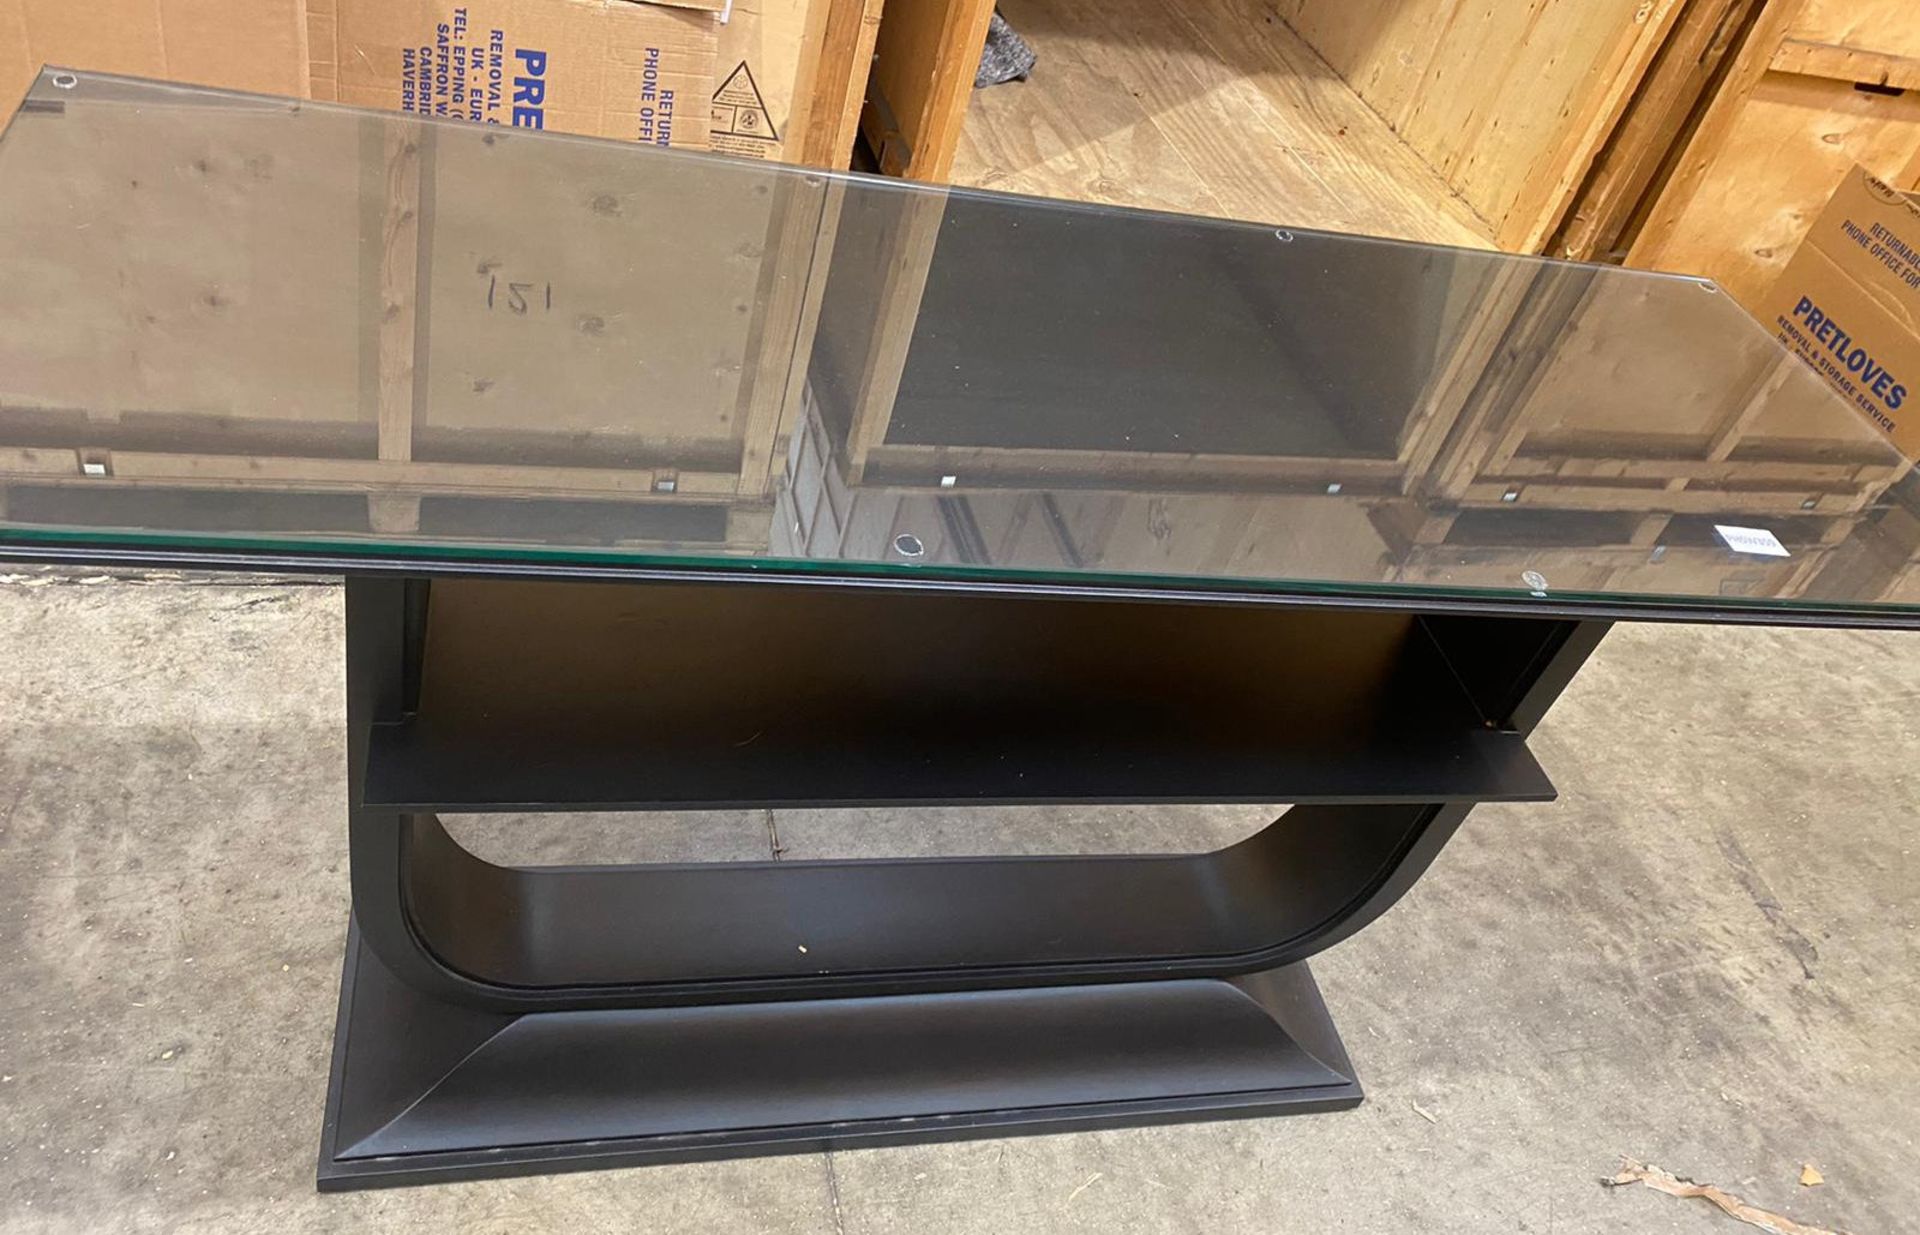 1 x Contemporay Console Table With a Black Finish, Glass Top Protector and Undershelf - Size: 1600 x - Image 3 of 3